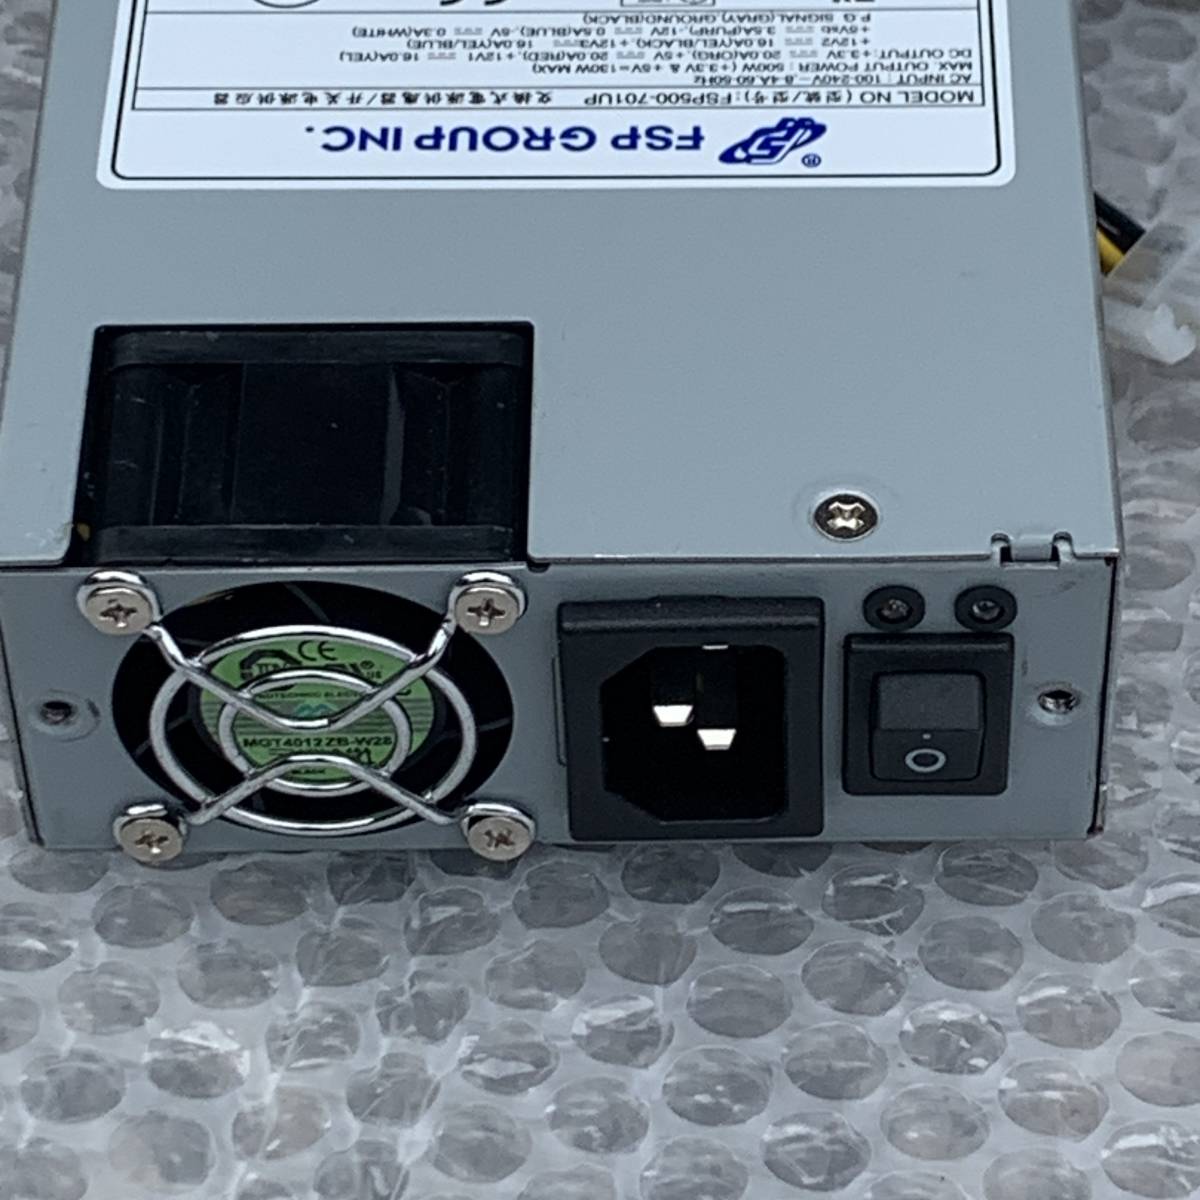 [ used ] server for 500W power supply FSP FSP500-701 80PLUS Gold certification / size approximately 25×10×4cm all-purpose connector 